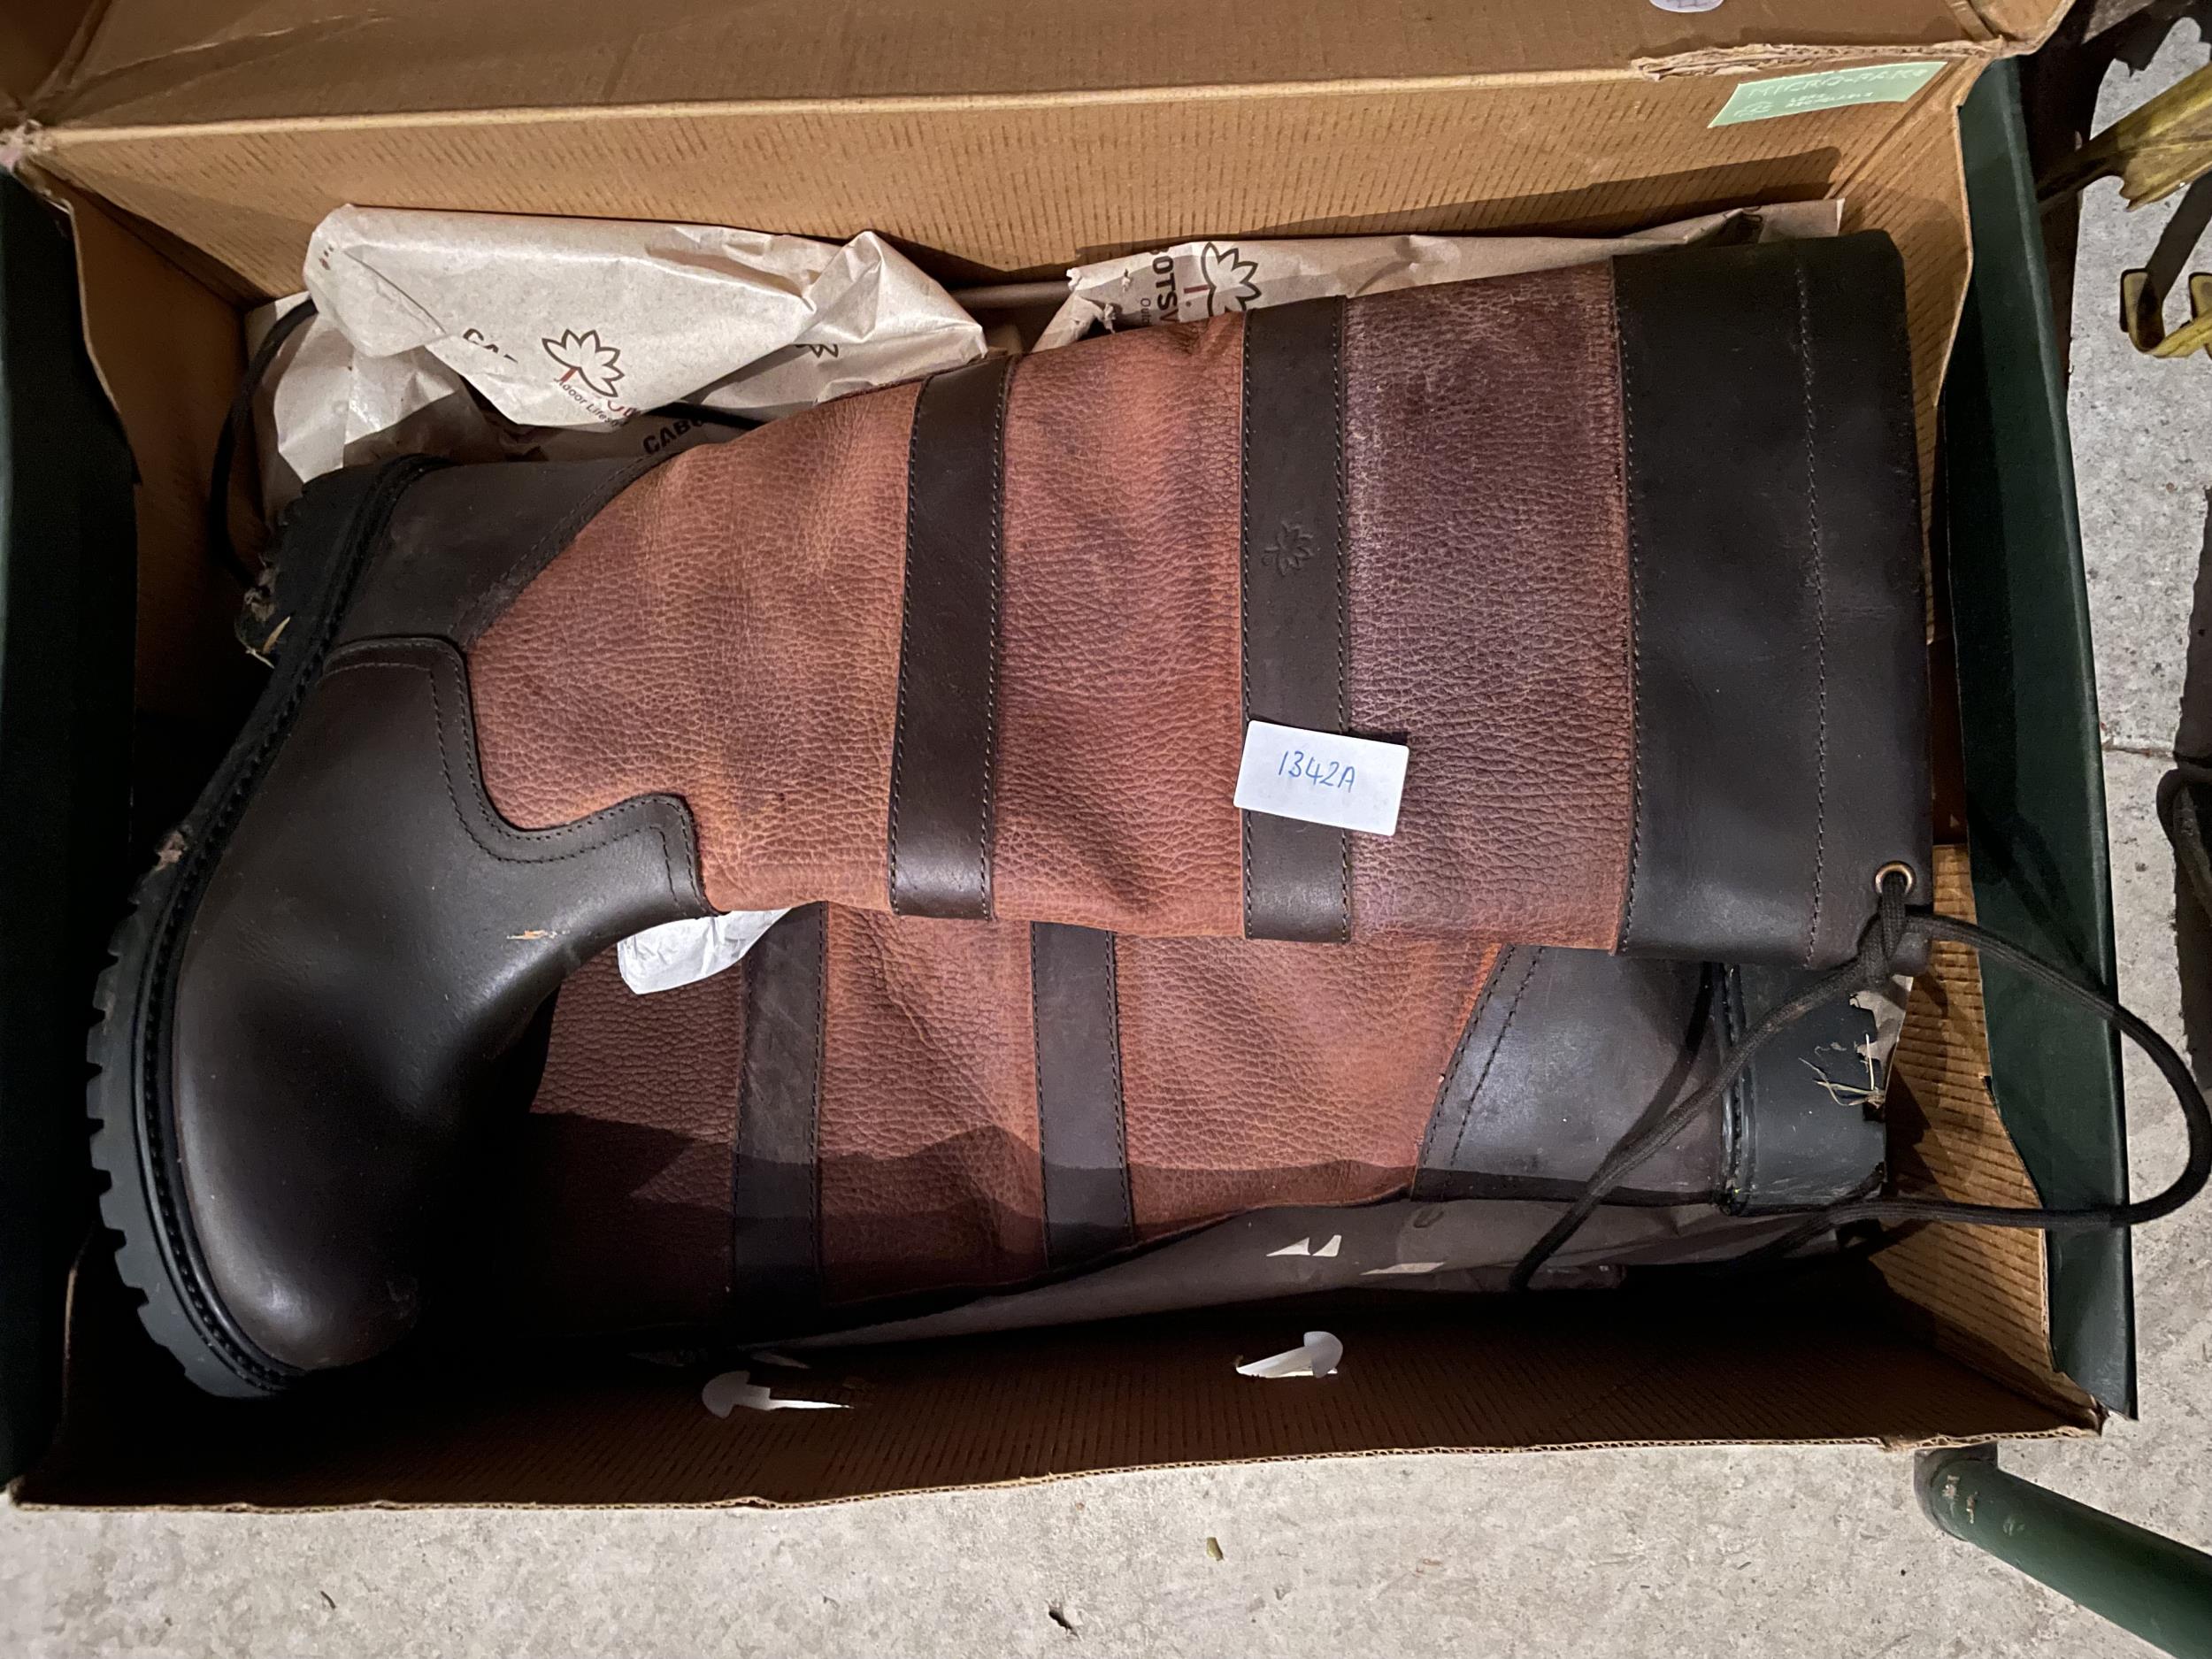 A PAIR OF SIZE 5.5 LADIES CABOTSWOOD BOOTS